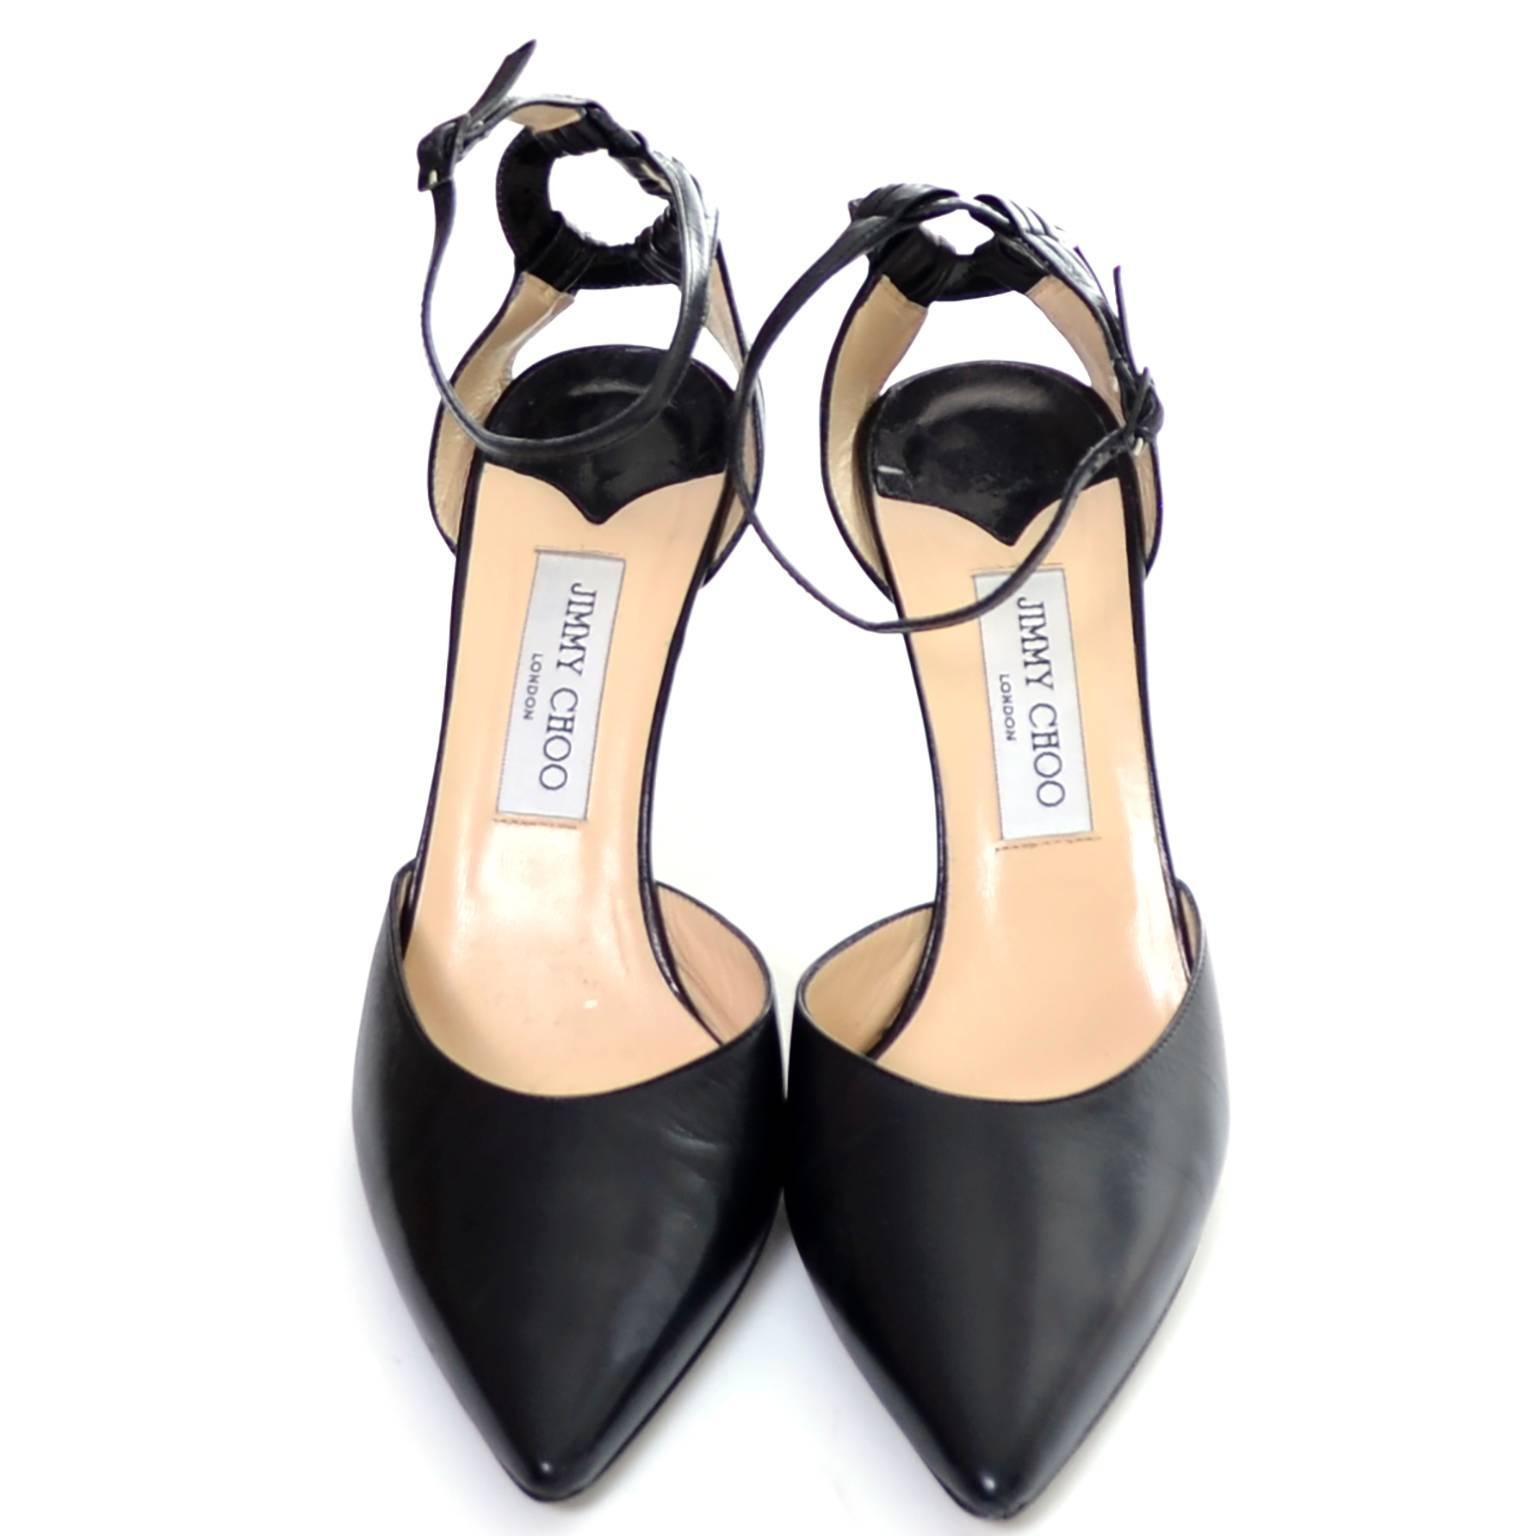 These Jimmy Choo black leather ankle strap shoes have 4